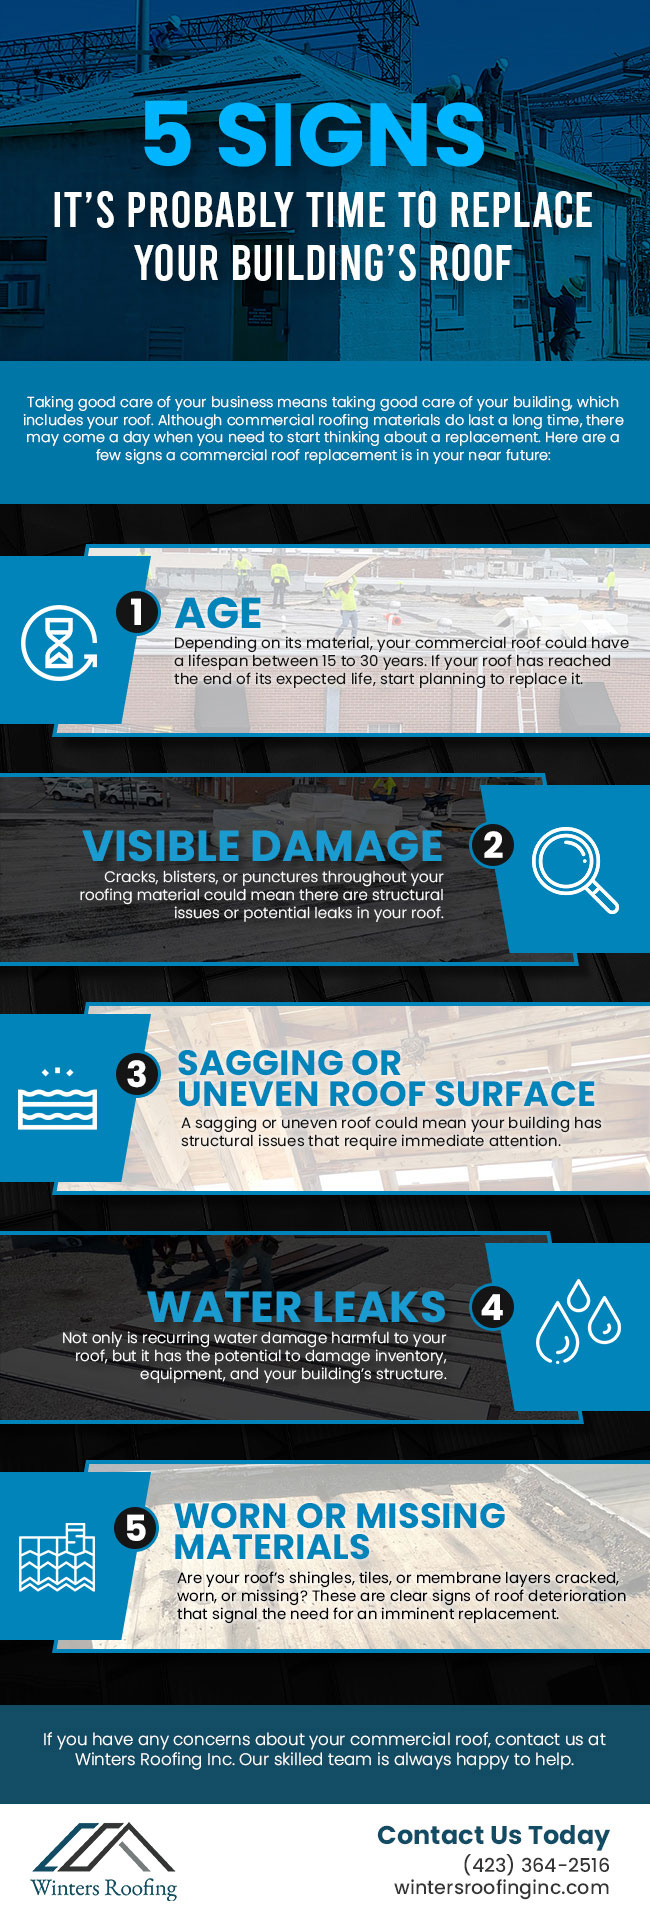 Warning Signs You Need Roof Replacement Soon